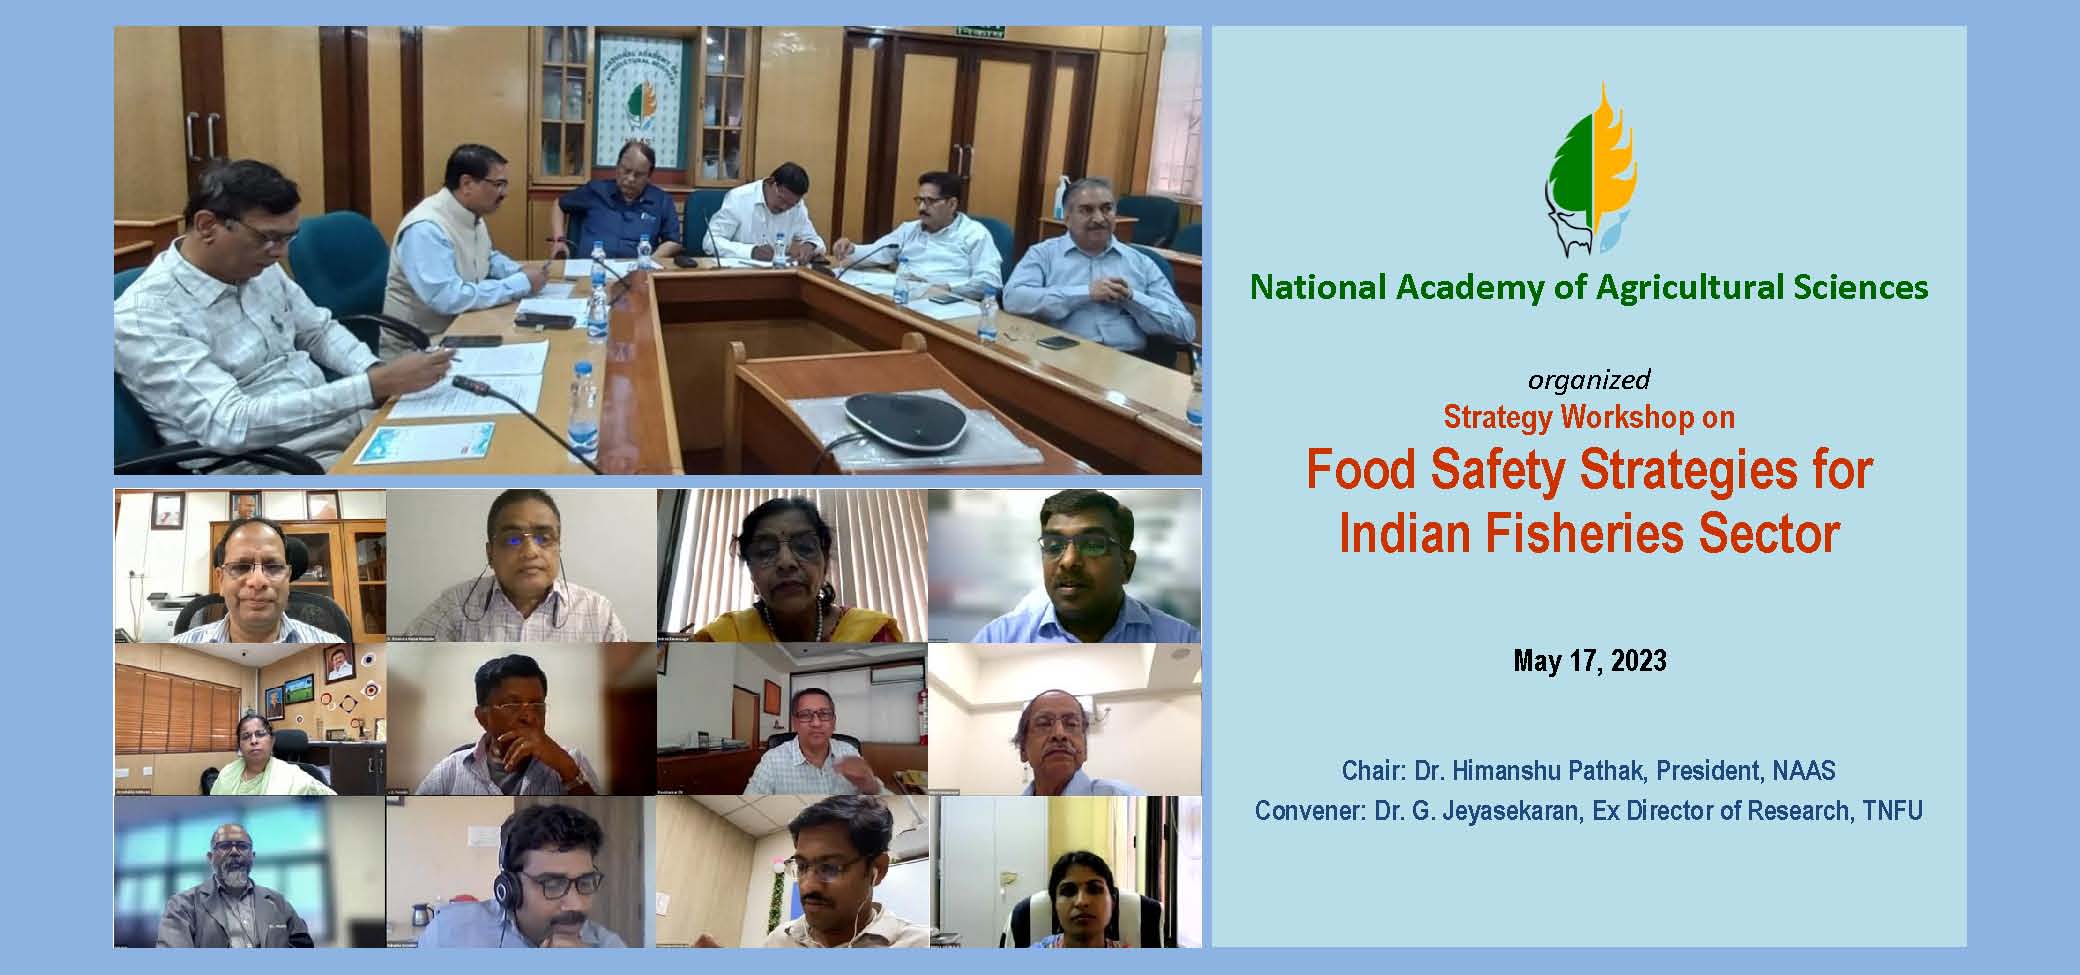 Strategy Workshop on Food Safety Strategies for Indian Fisheries Sector